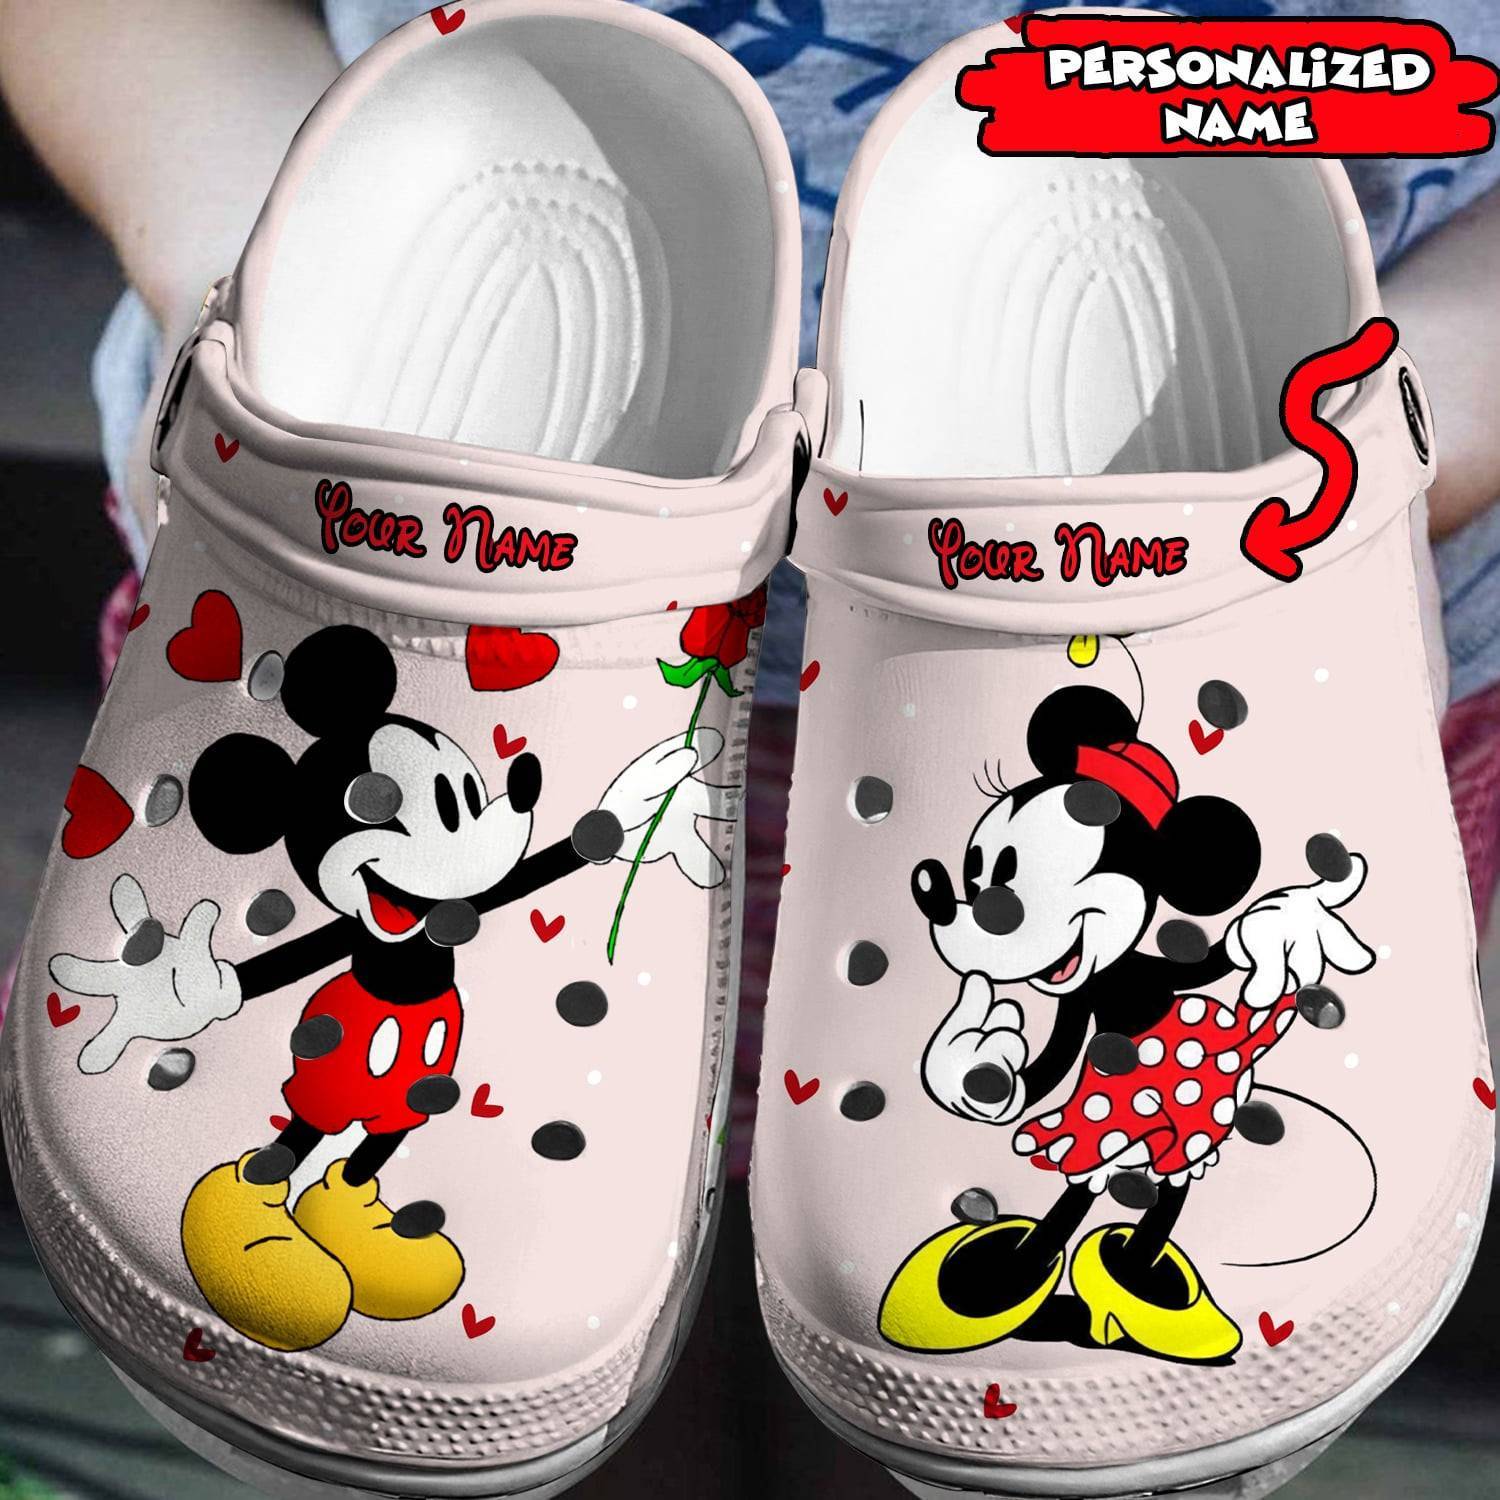 Disney Magic at Your Feet: Personalized Mickey Minnie Crocs 3D Clog Shoes